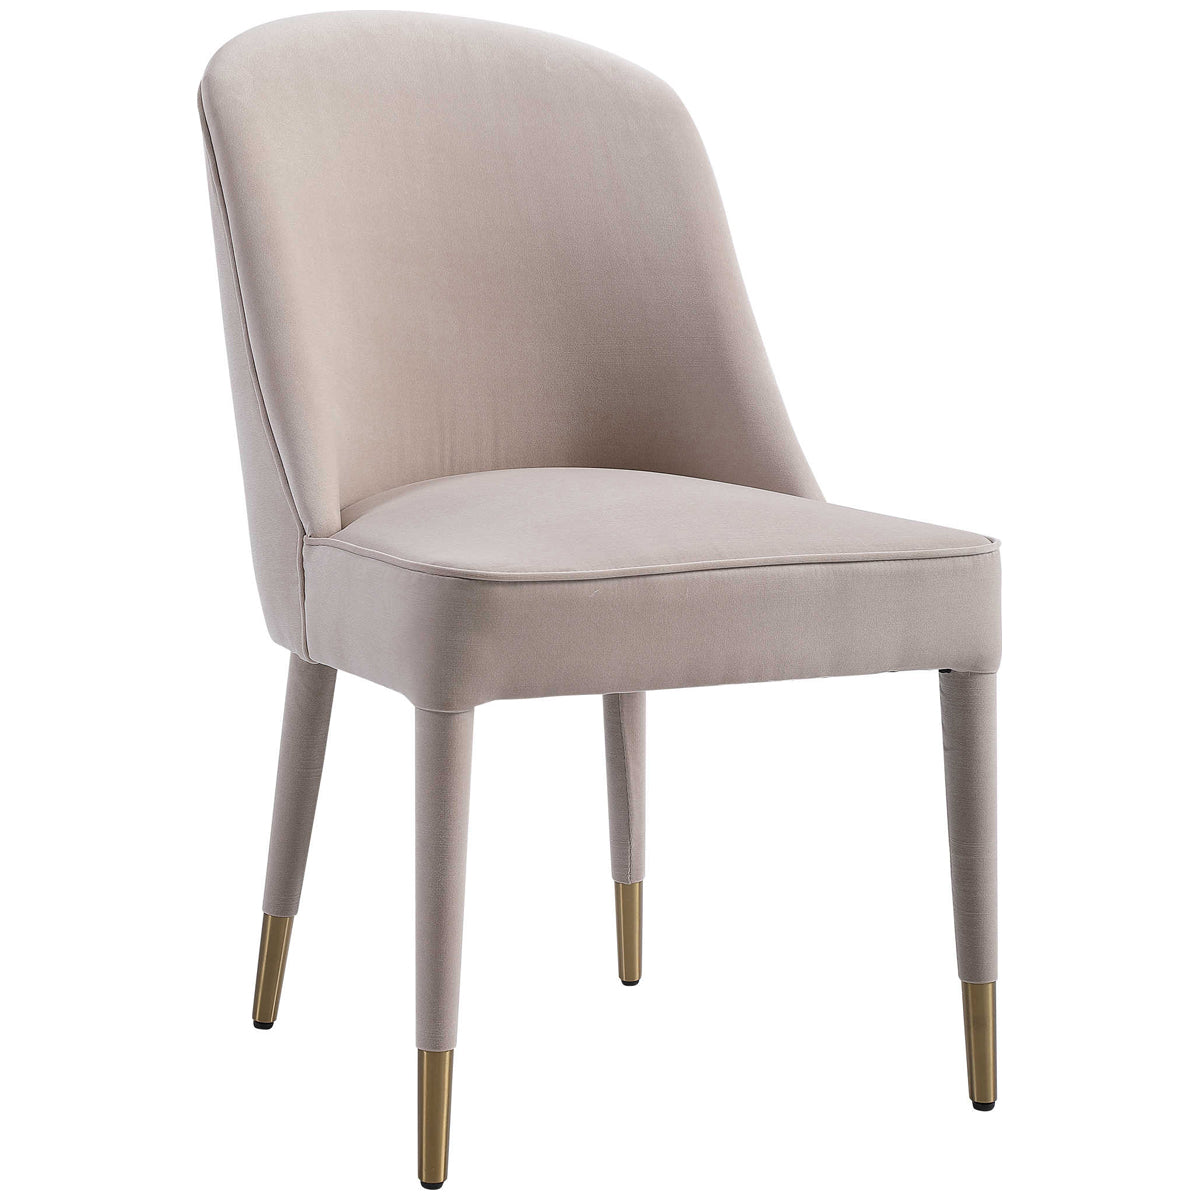 Uttermost Brie Armless Chair, Champagne, Set of 2